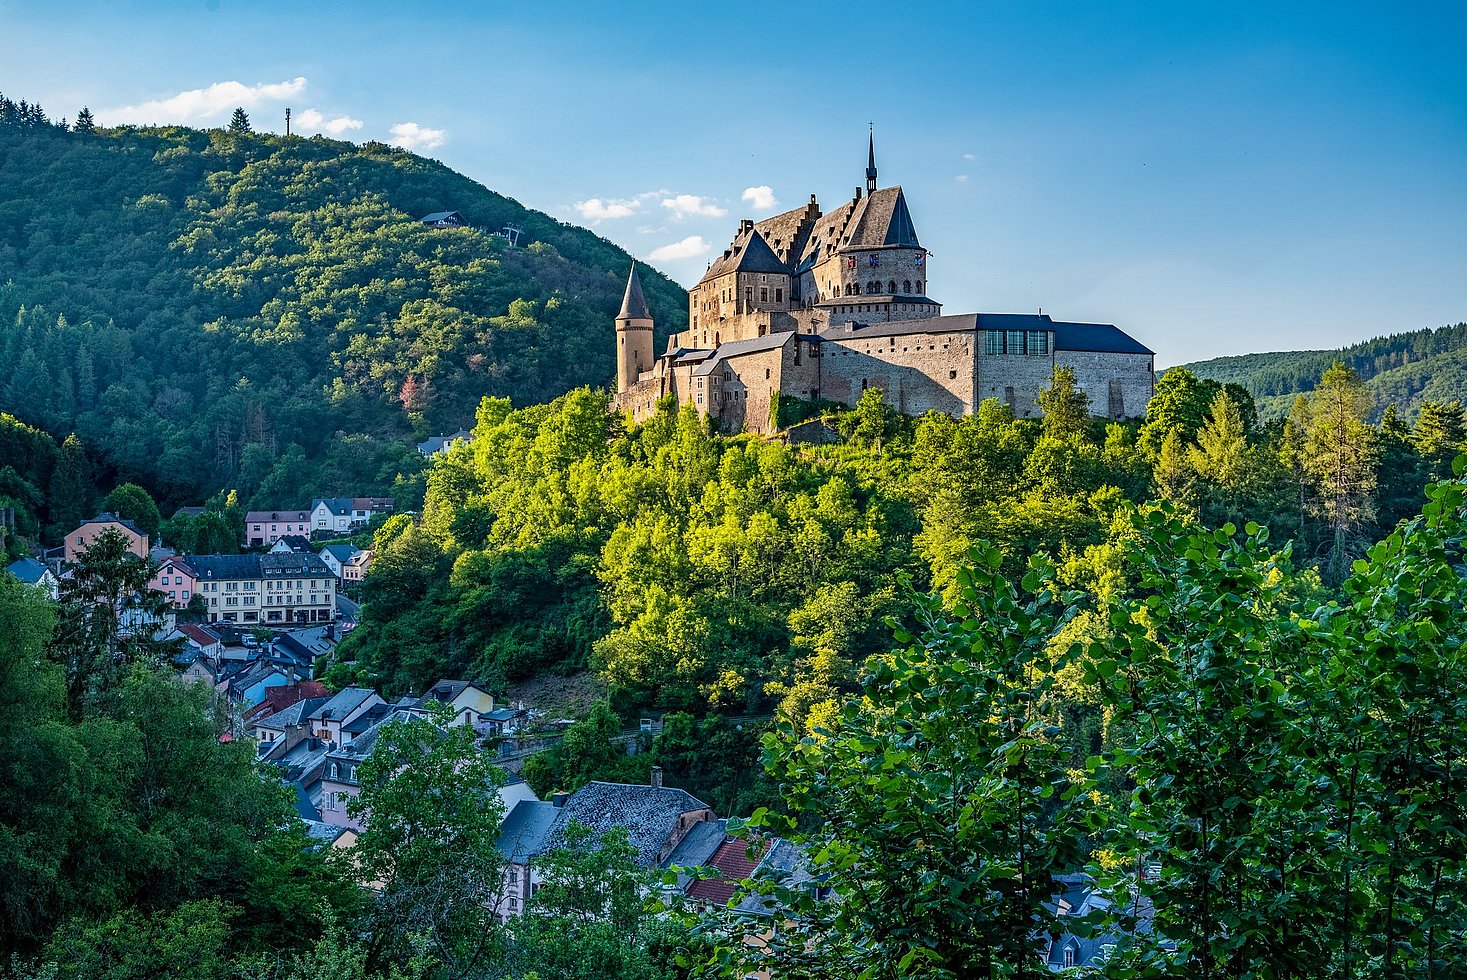 A view of Vianden Castle on a sunny day with a view of the surrounding town.